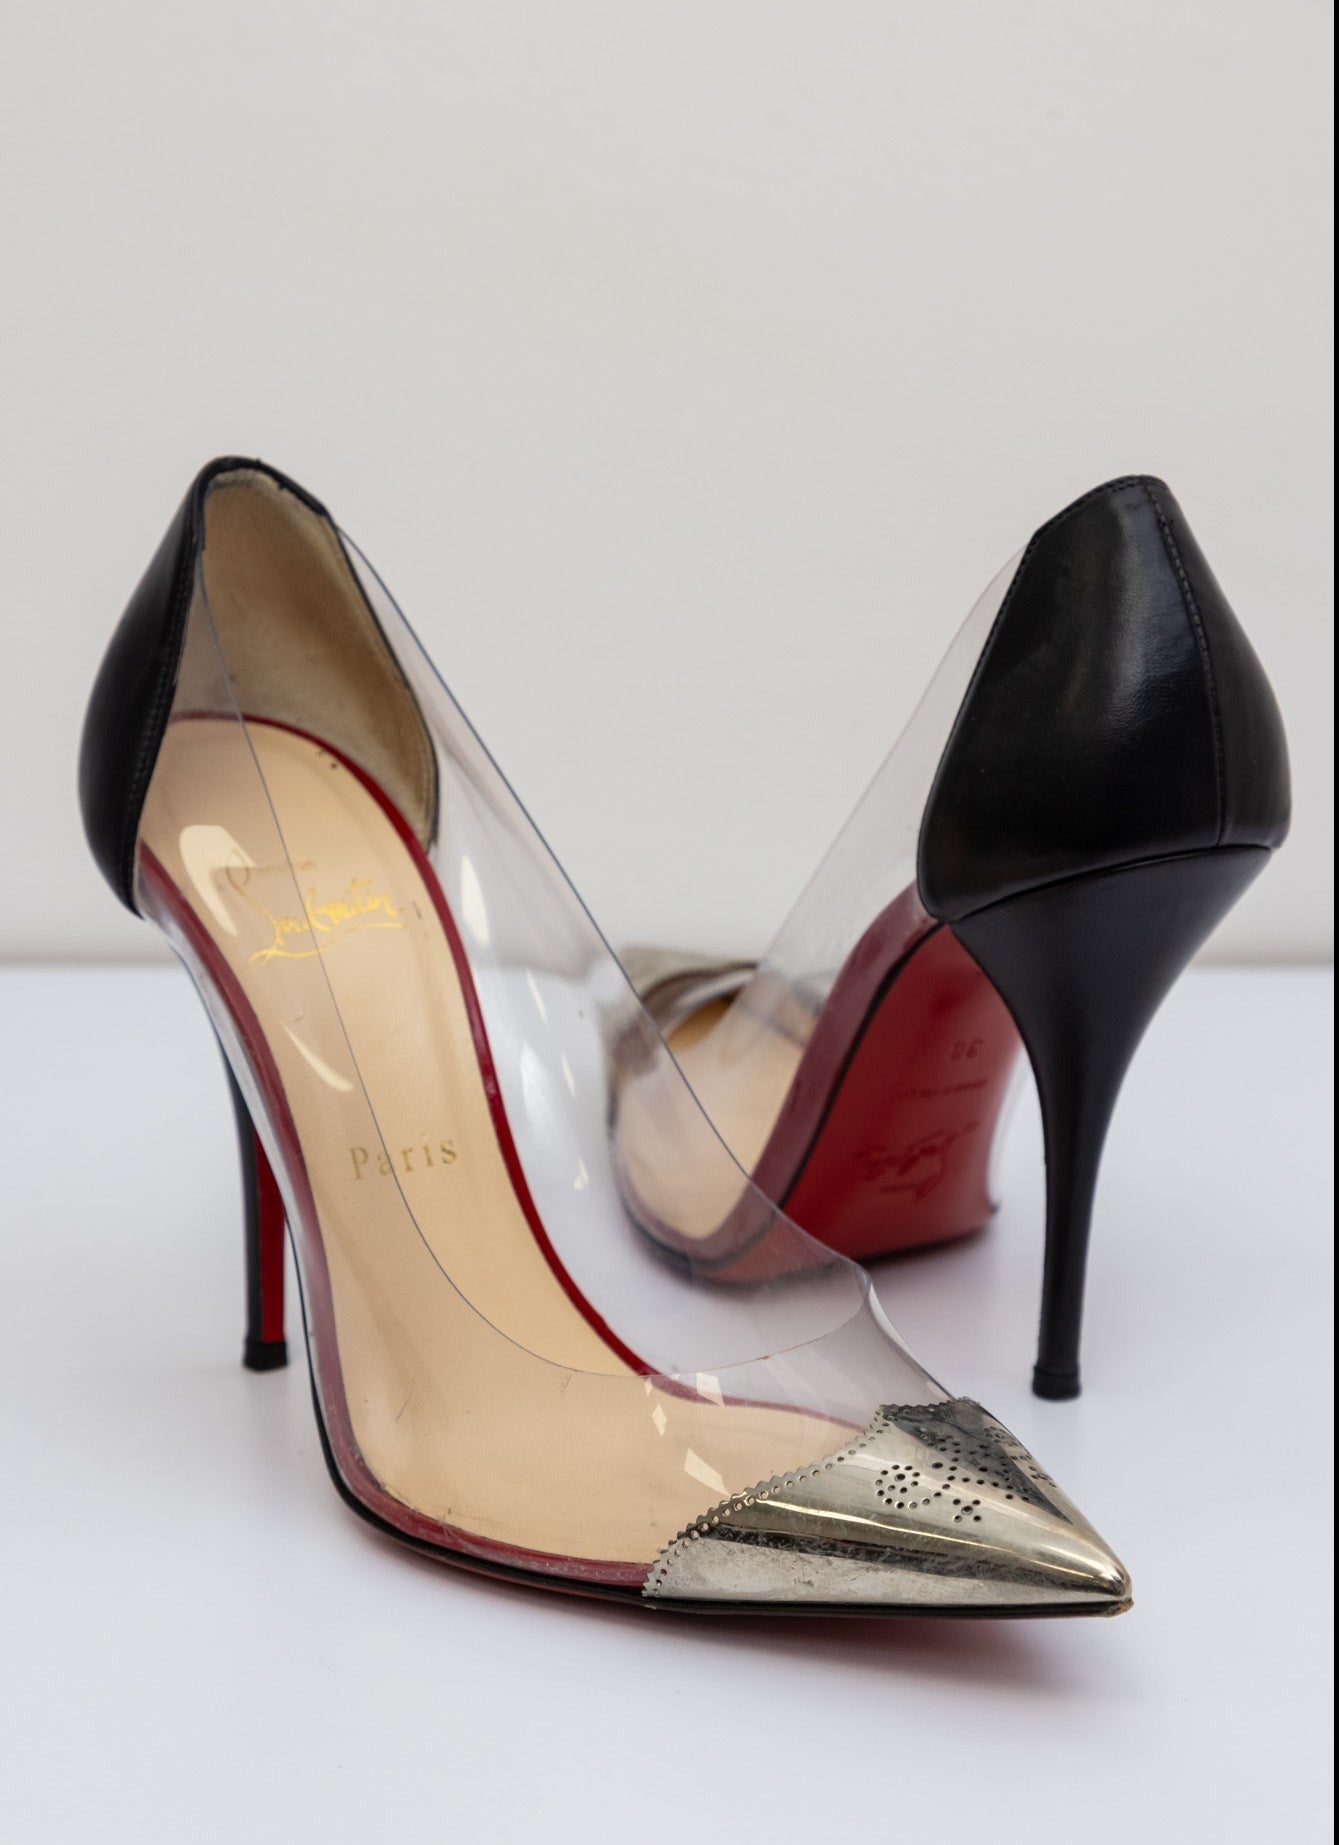 CHRISTIAN LOUBOUTIN Pointed Toe Metal Clear Pumps - Black Silver - Size IT 38 - Very Good Condition - Made in Italy"